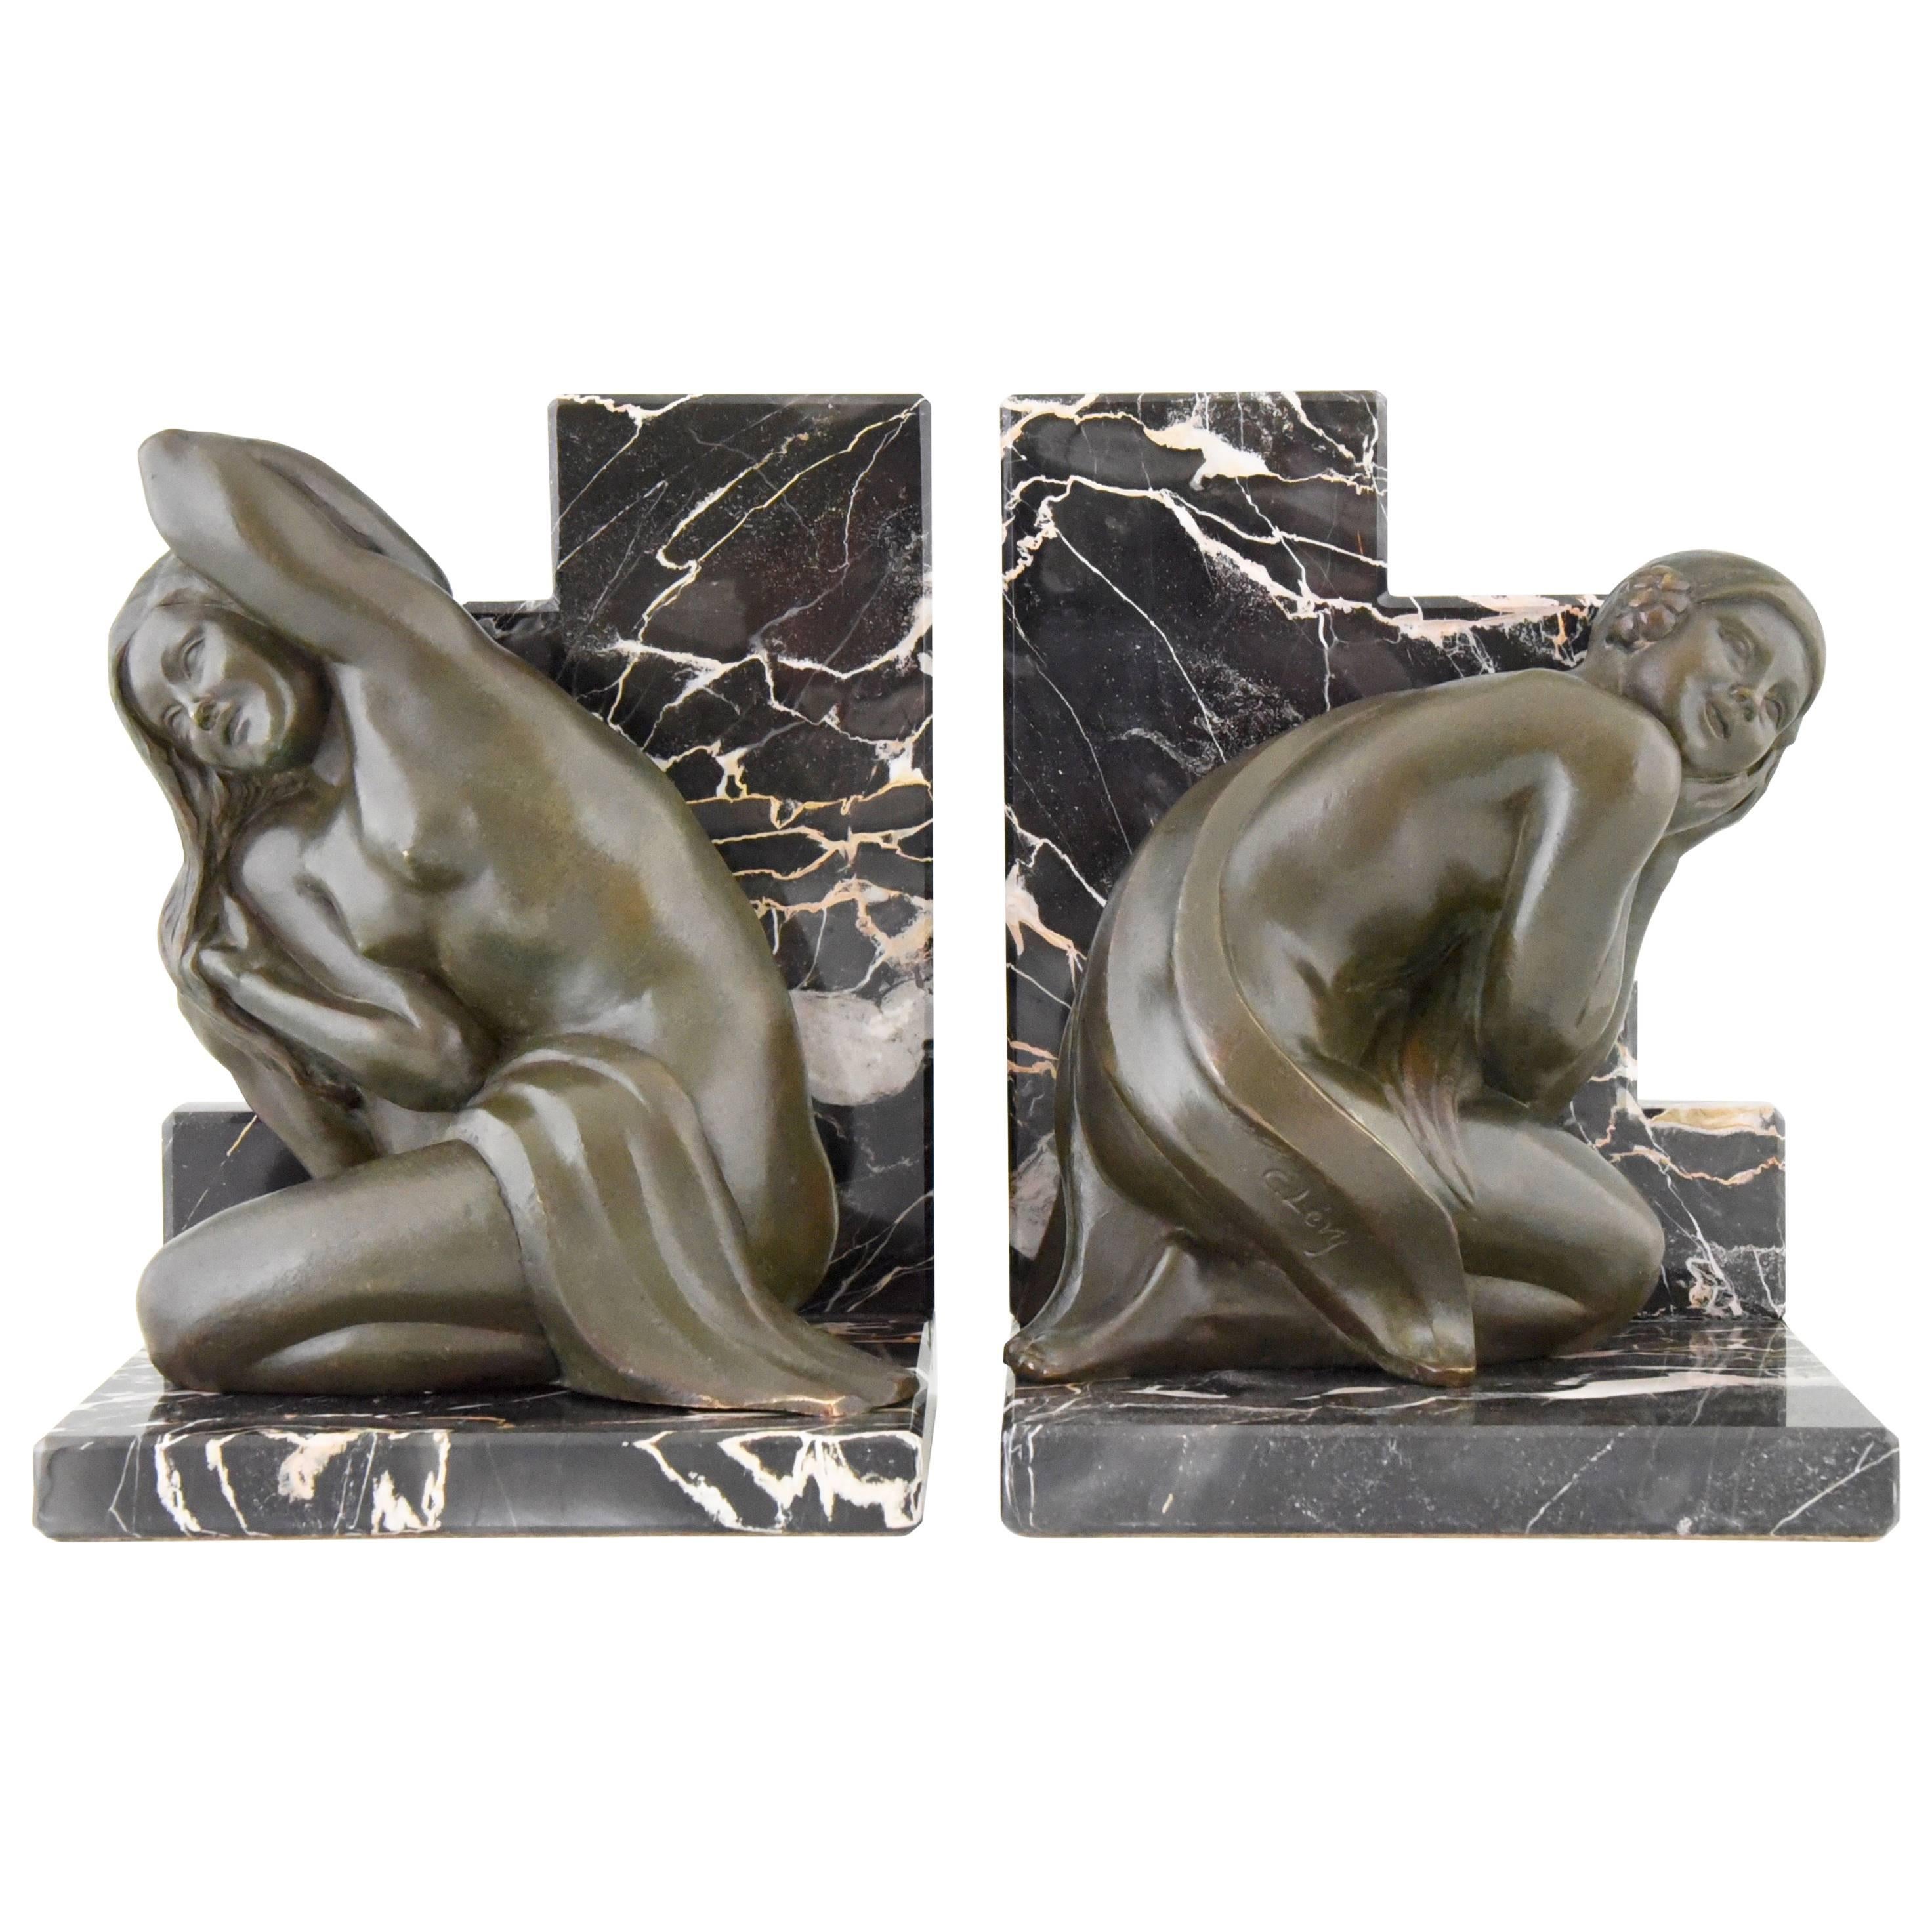 French Art Deco Bronze Bookends with Nudes by C. Levy Kinsbourg, 1930